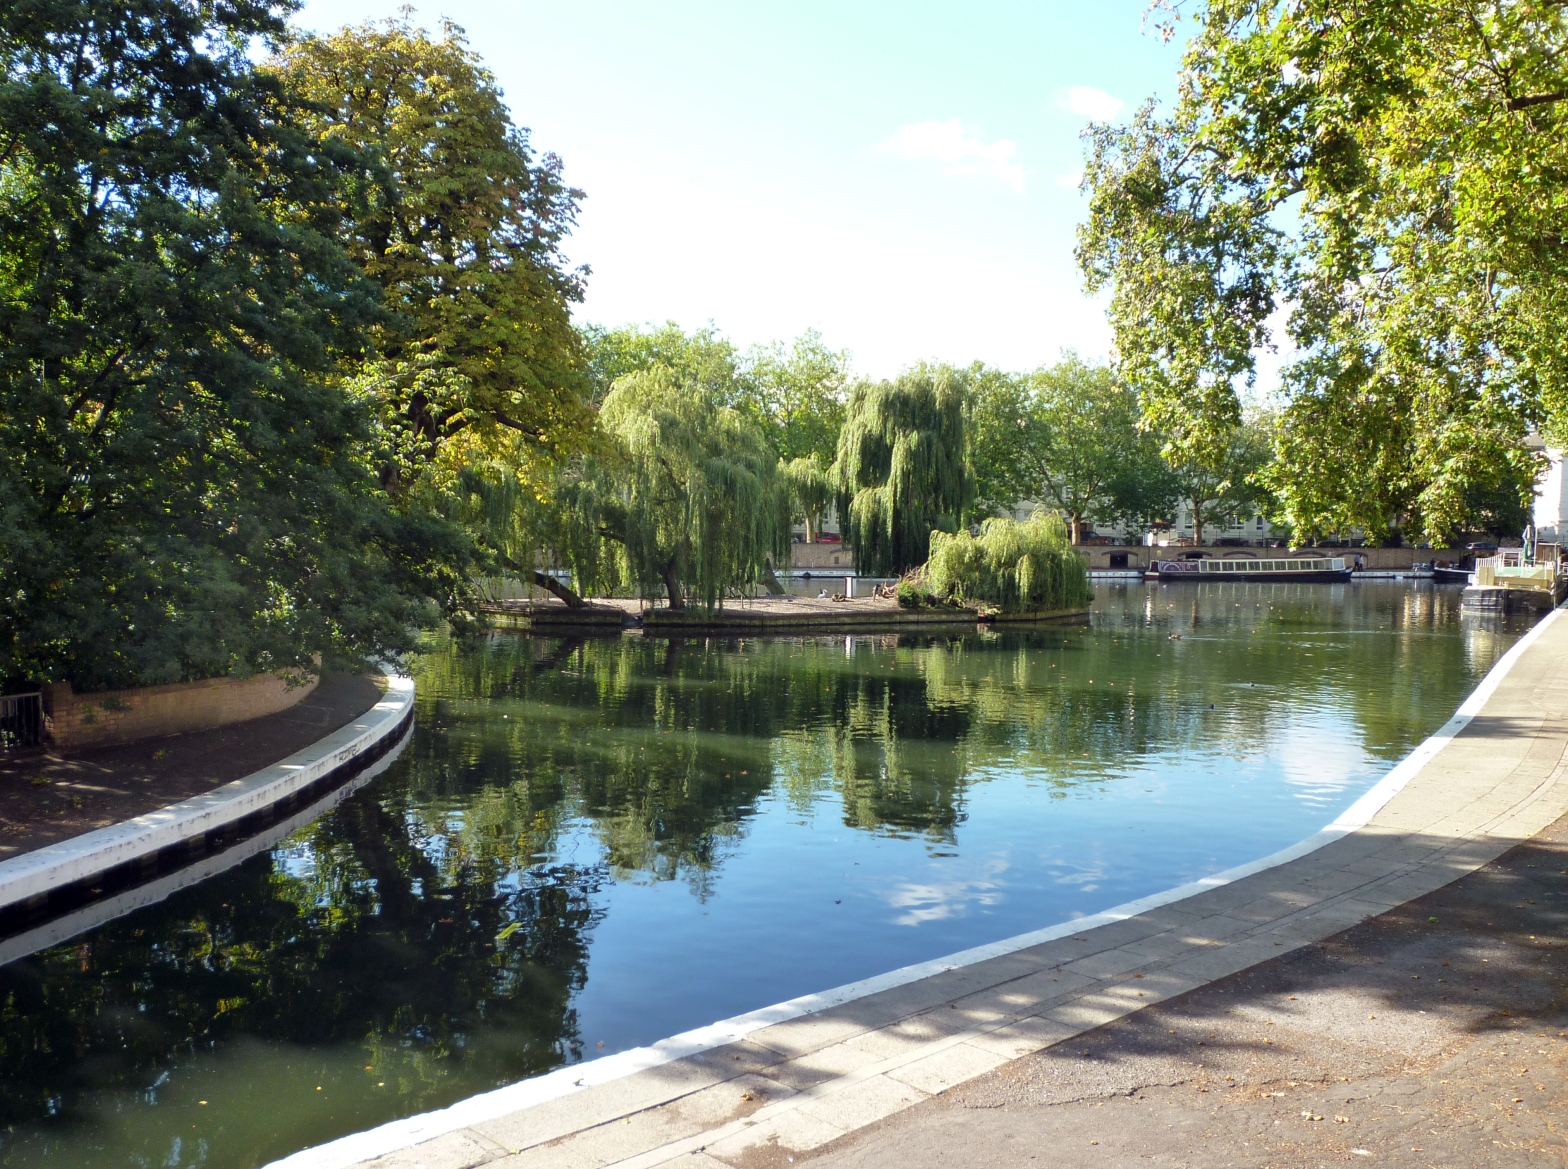 Little Venice, passed on the first leg of the Chiltern Railway Walk, between Marylebone and Wembley Stadium